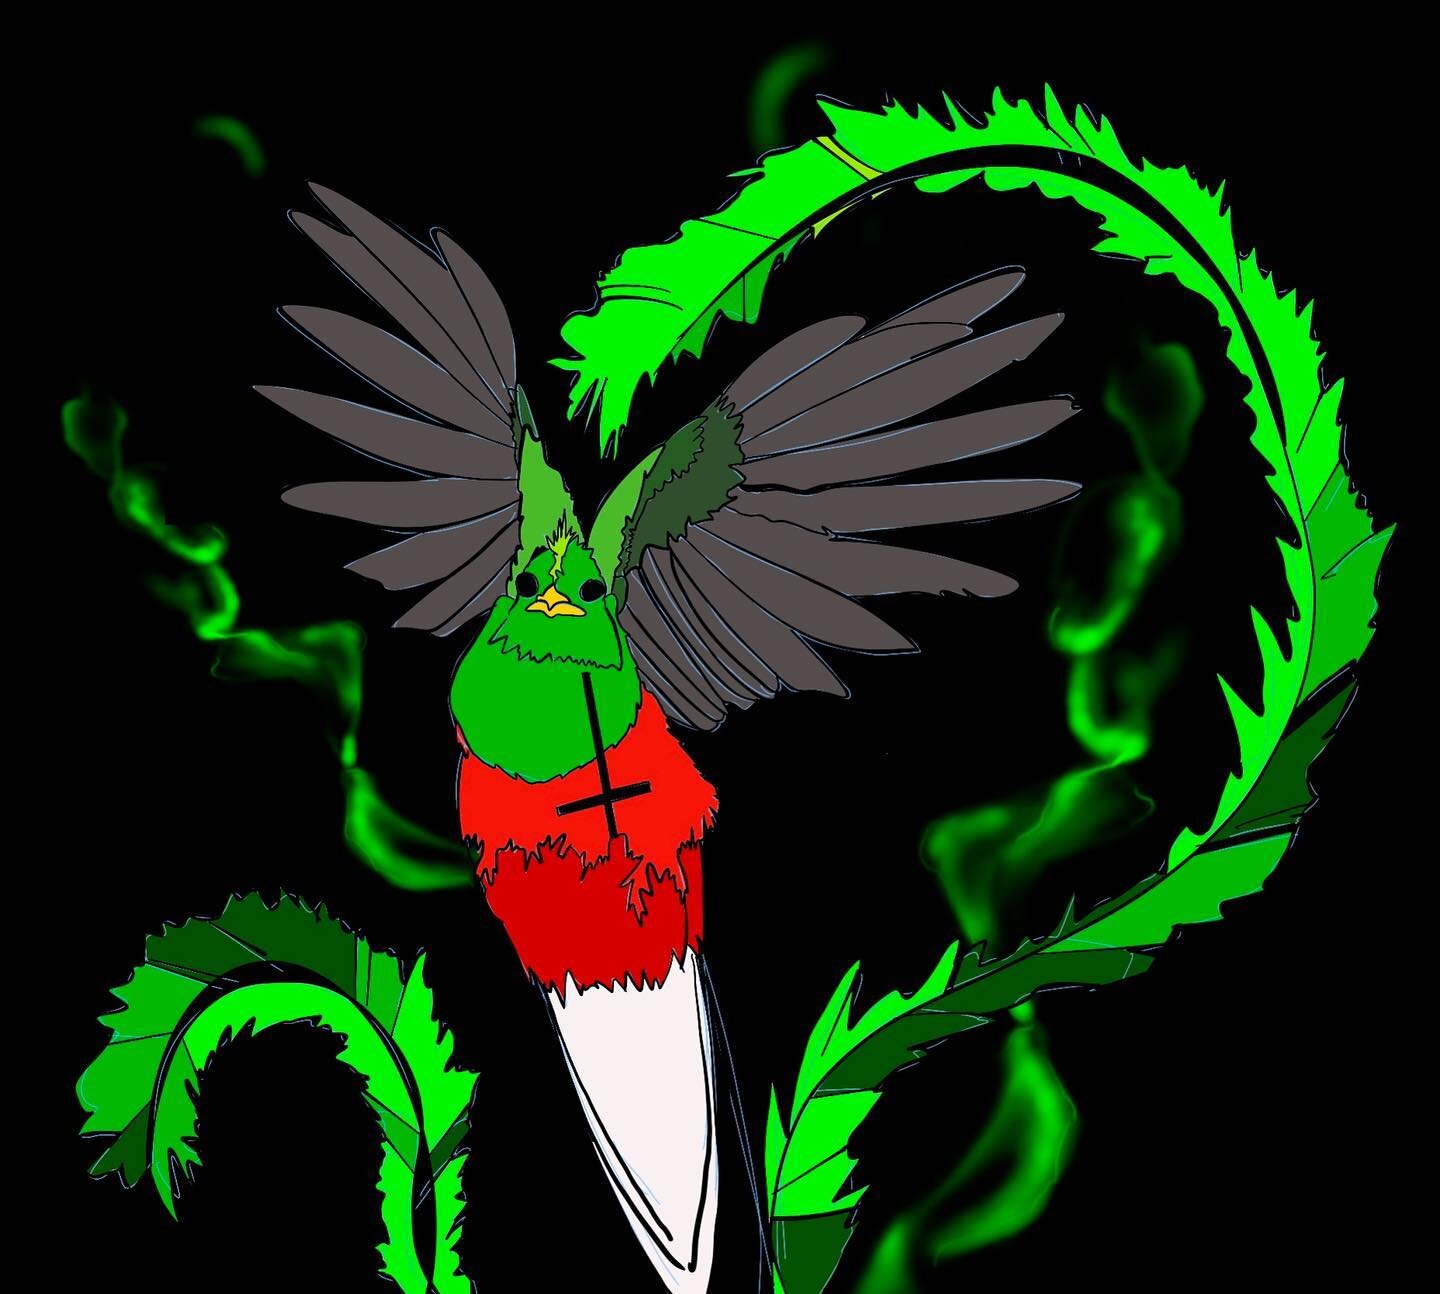 Been kinda sleepin&rsquo; on this piece for awhile. This is the Resplendent Quetzal, one of my favorite birds of Mesoamerica. Sure maybe it&rsquo;s a bit clich&eacute; to say that it&rsquo;s one of the best birds in Mexico and Central America but com